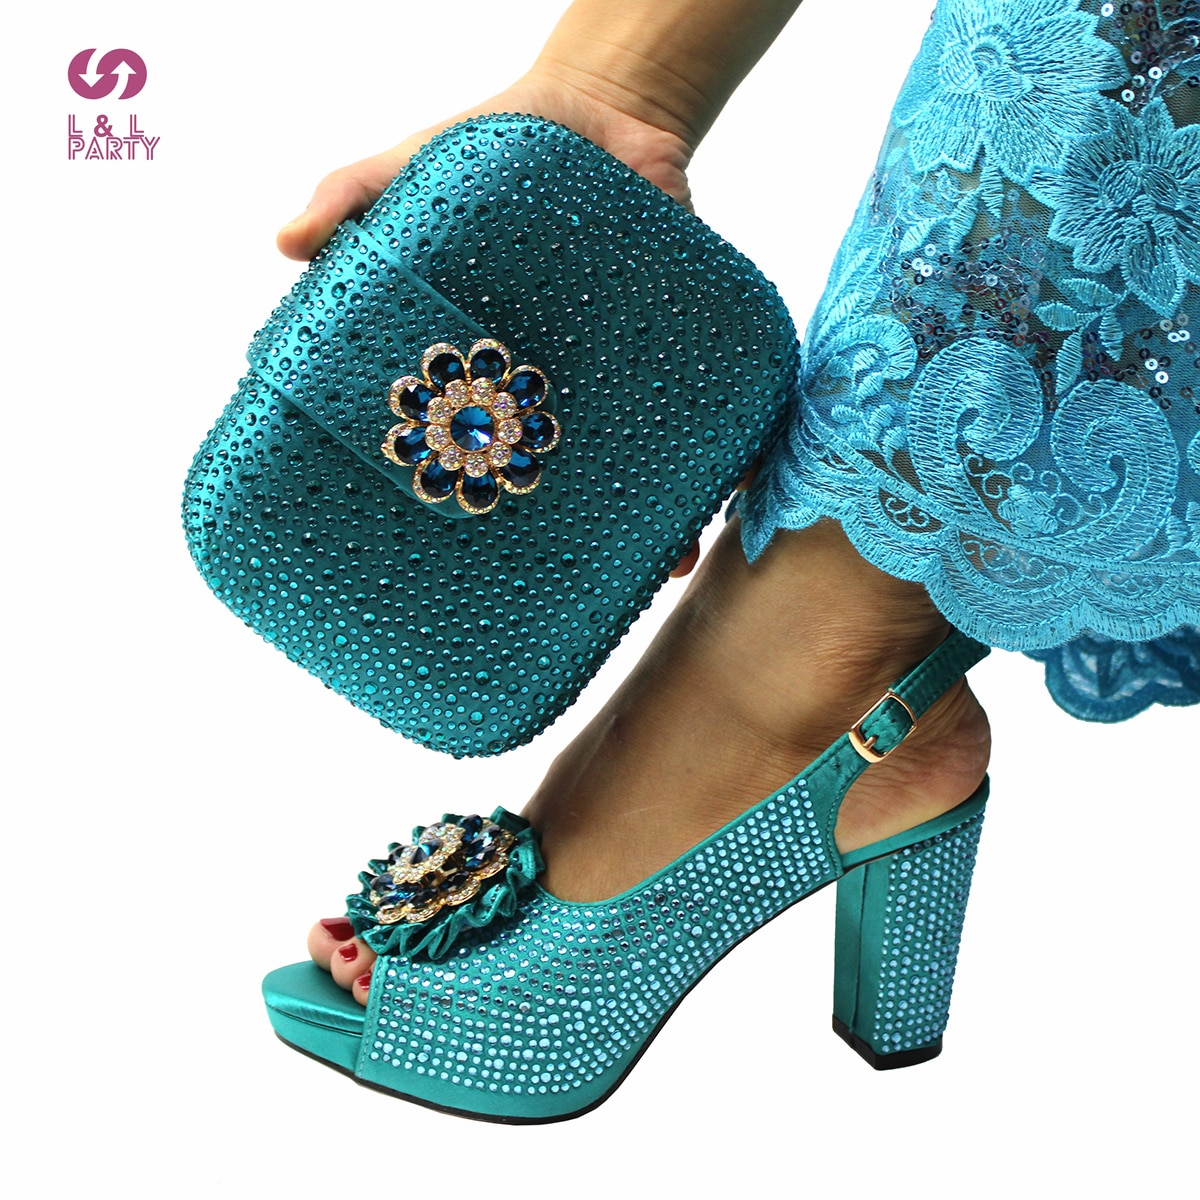 Italian Women Party Shoes and Bag Set in Teal Color High Quality Comfortable Heels with Shinning Crystal for Christmas